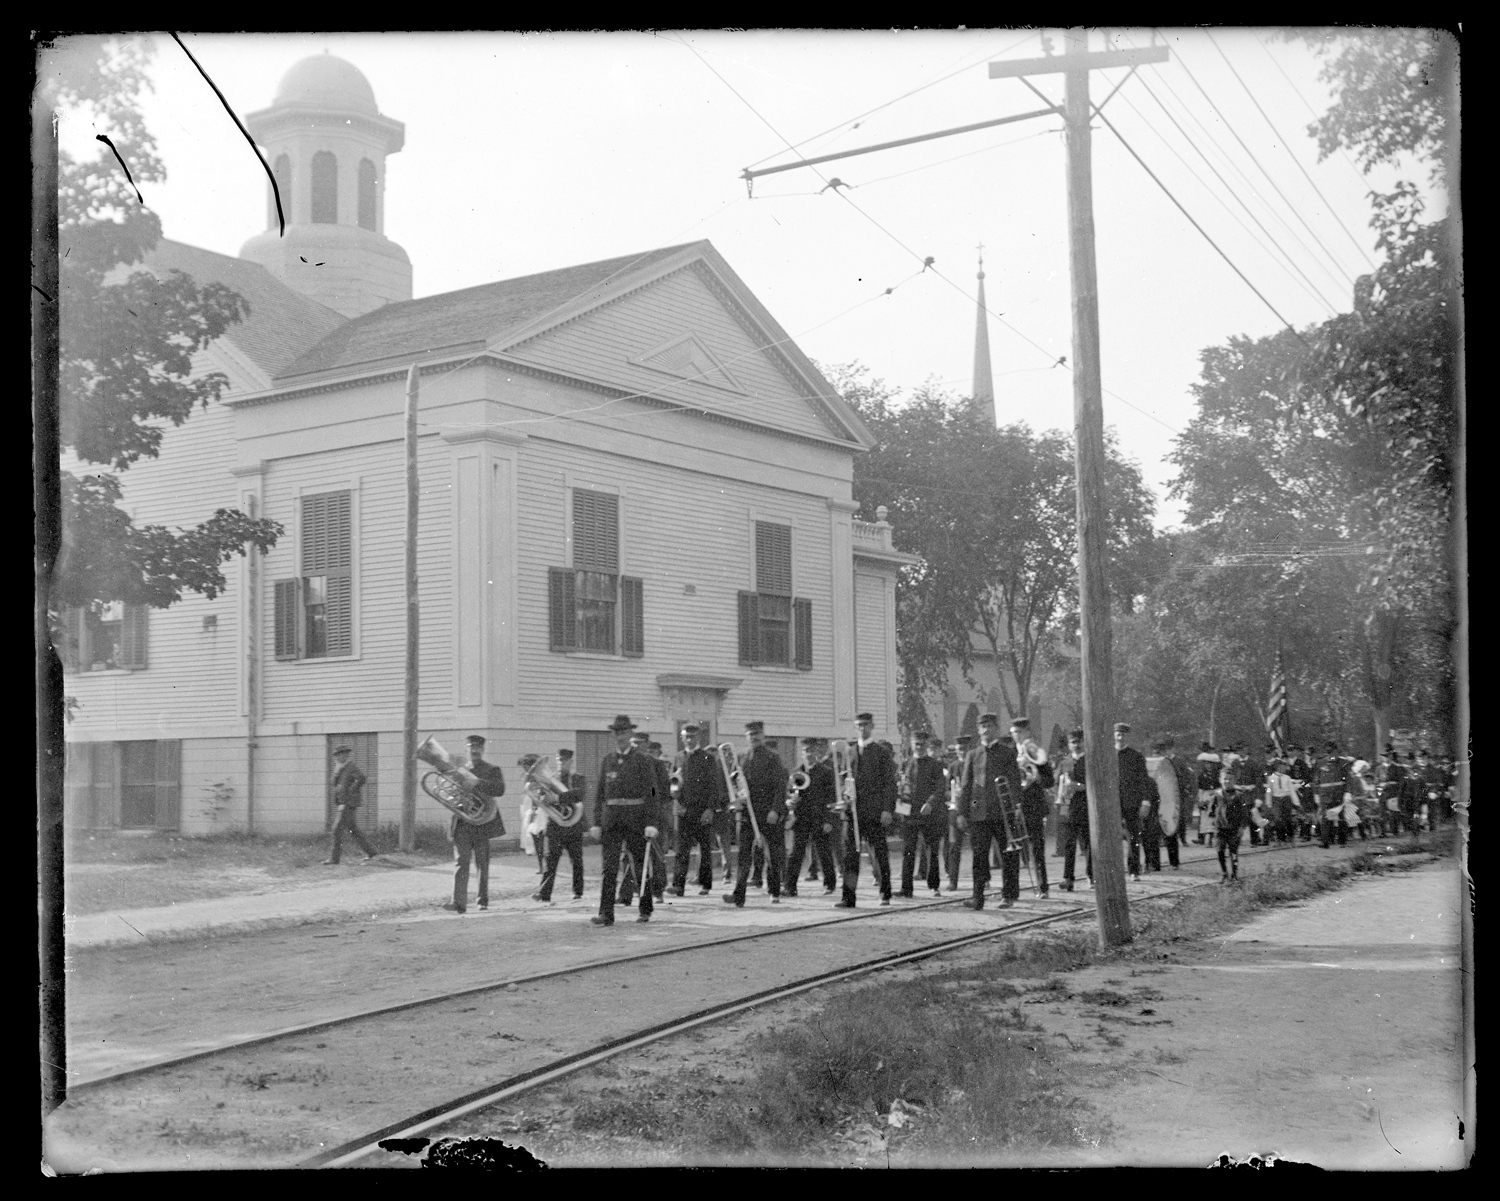 Band marching on Green Street, Kingston, 1903